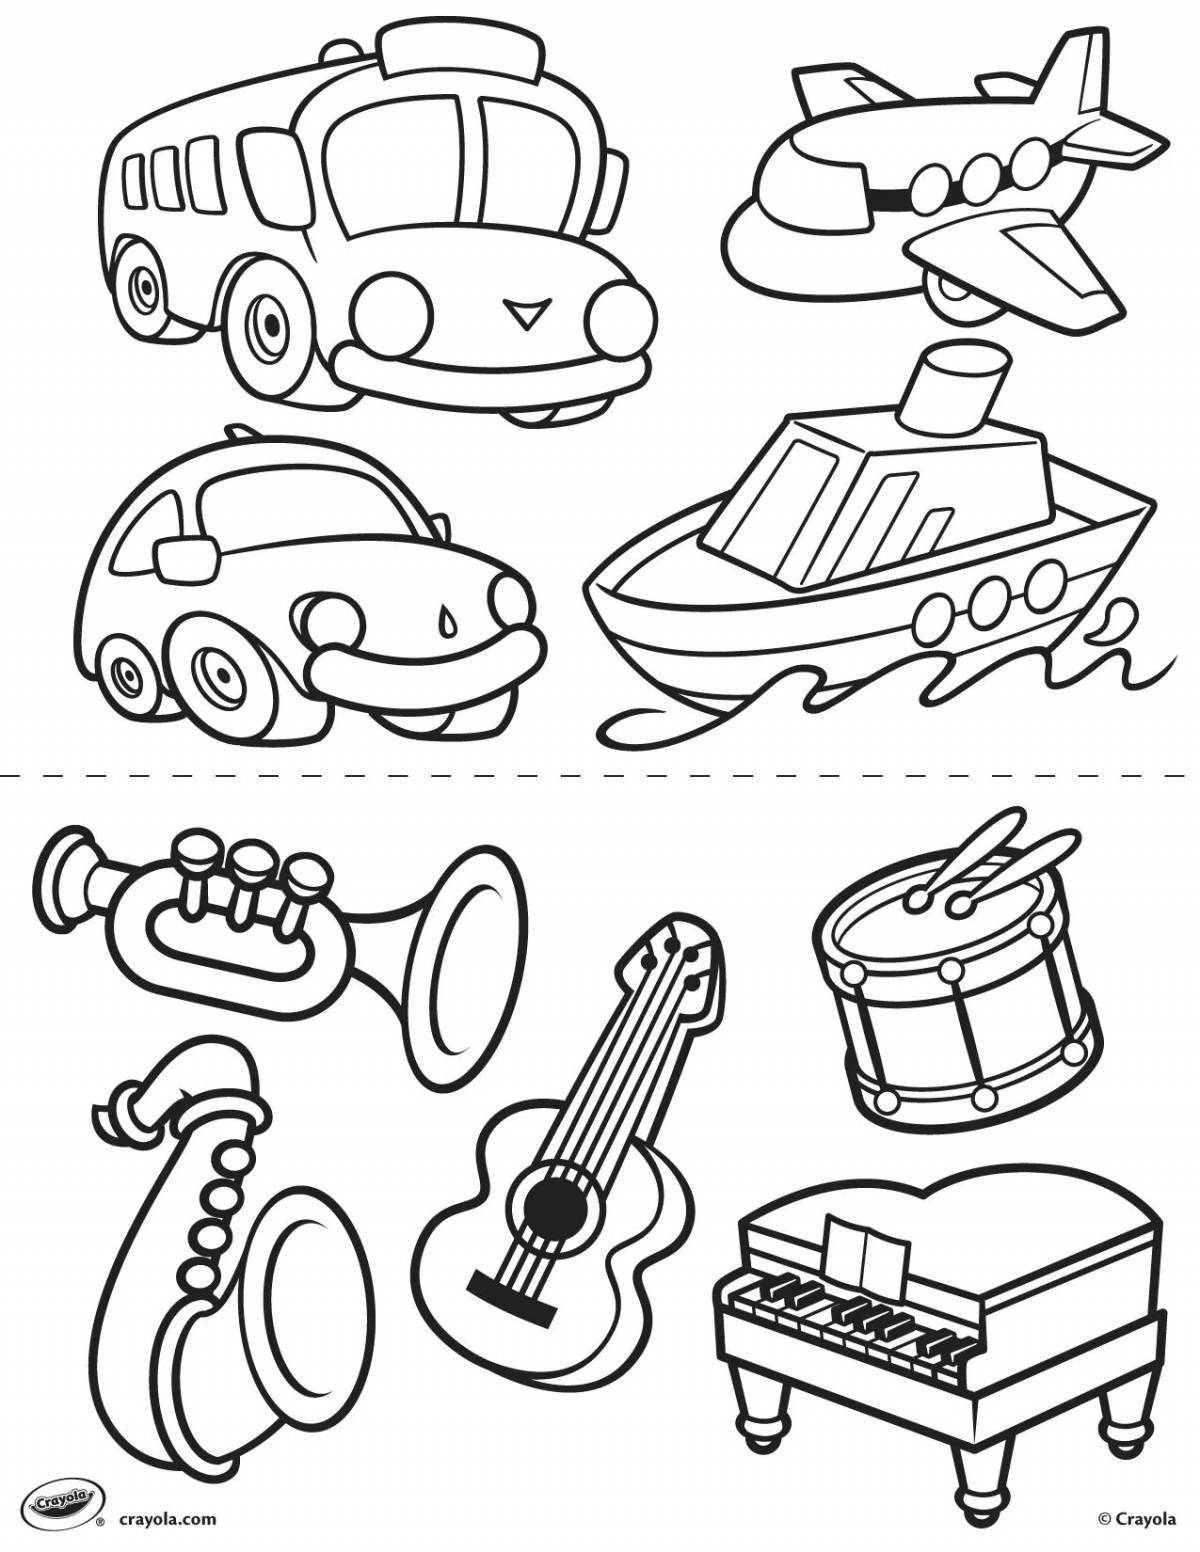 Amazing transport coloring book for 4-5 year olds